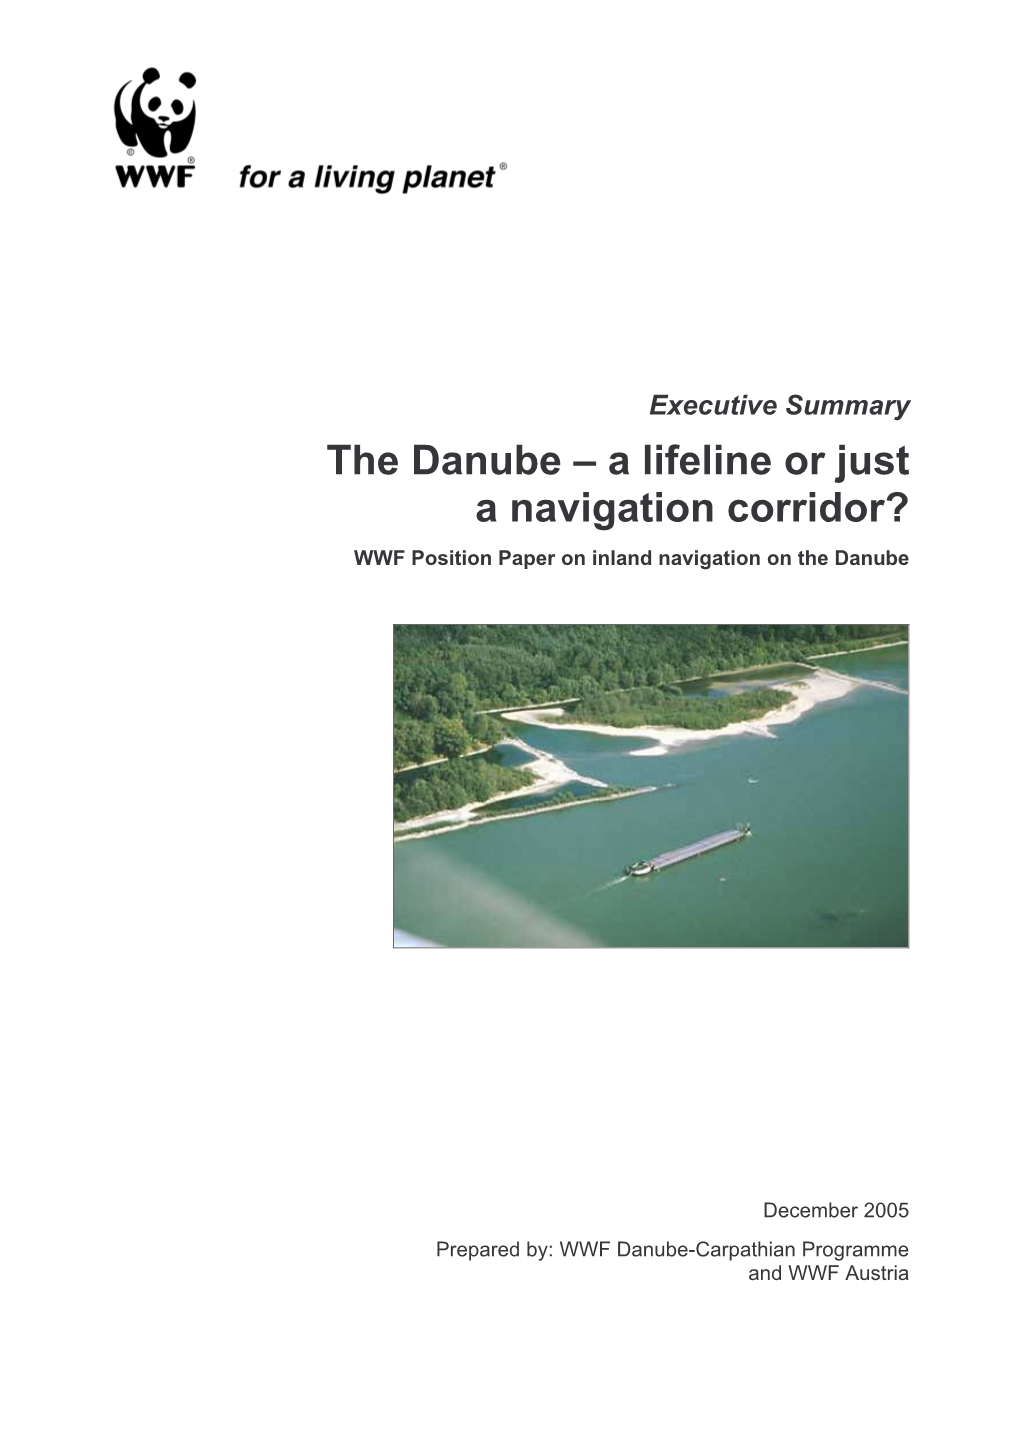 The Danube Œ a Lifeline Or Just a Navigation Corridor? WWF Position Paper on Inland Navigation on the Danube